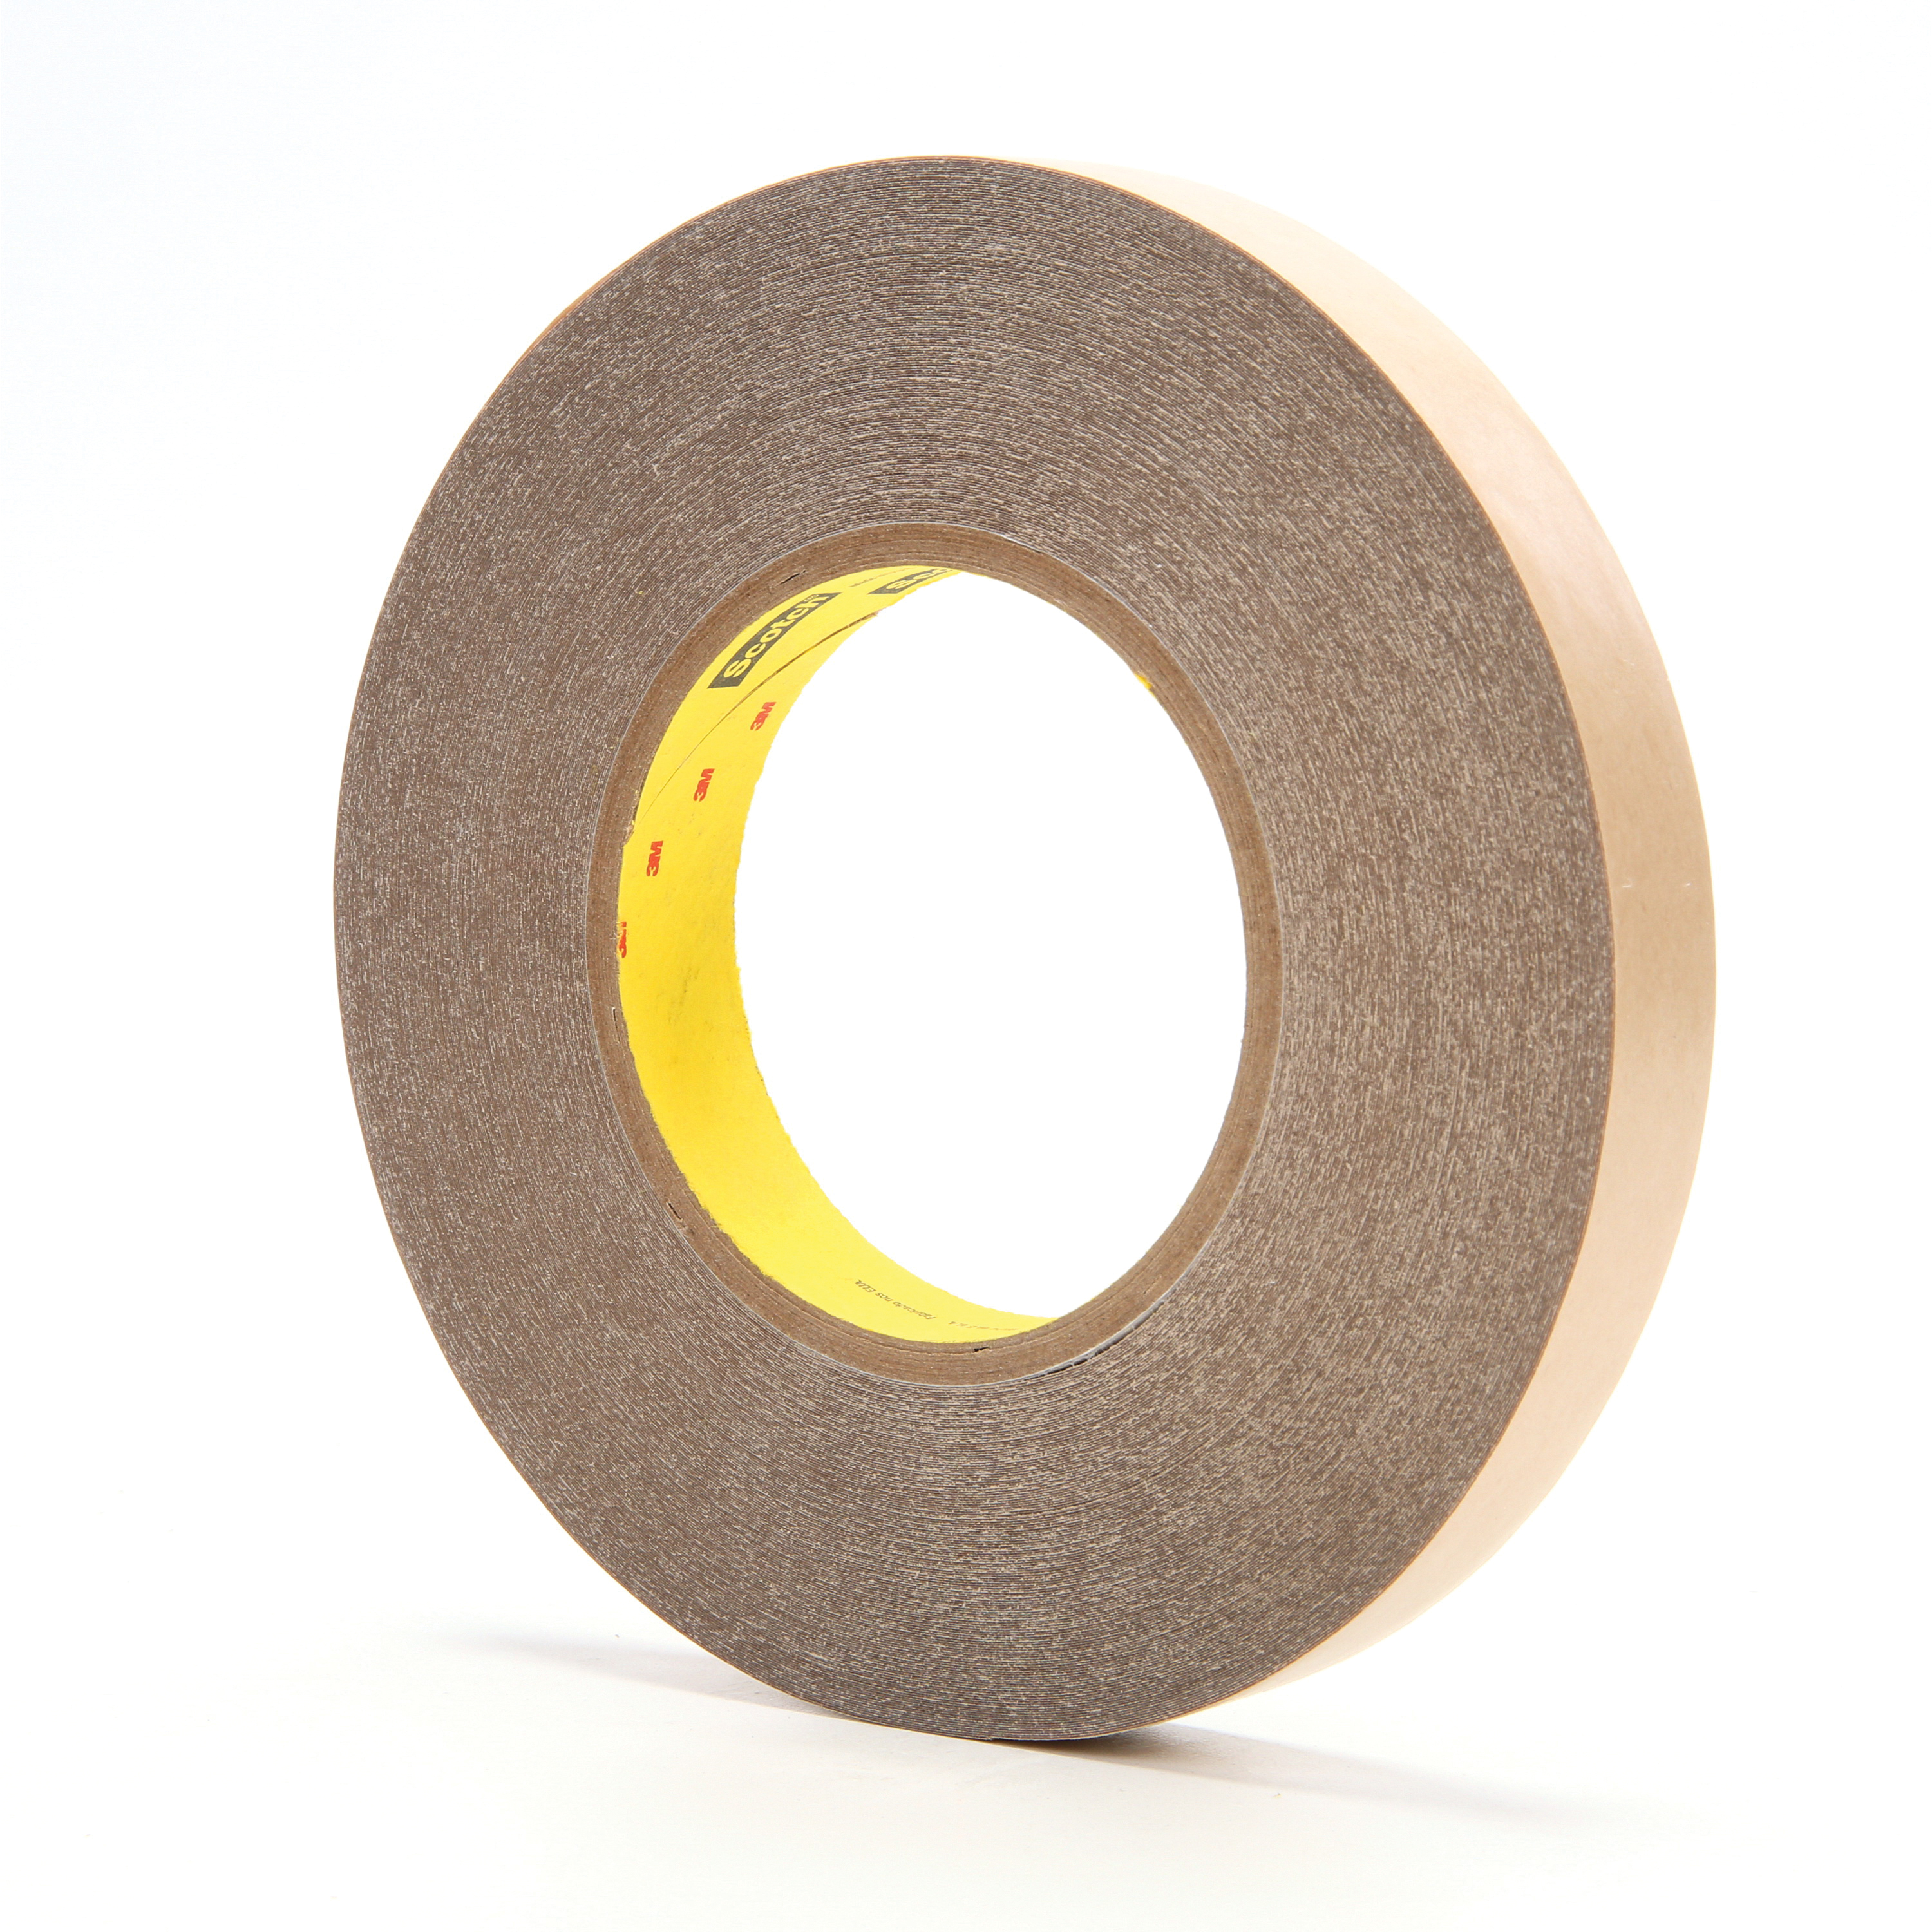 3M™ 021200-67233 High Tack High Performance Adhesive Transfer Tape, 60 yd L x 3/4 in W, 9.2 mil THK, 5 mil 350 Acrylic Adhesive, Clear